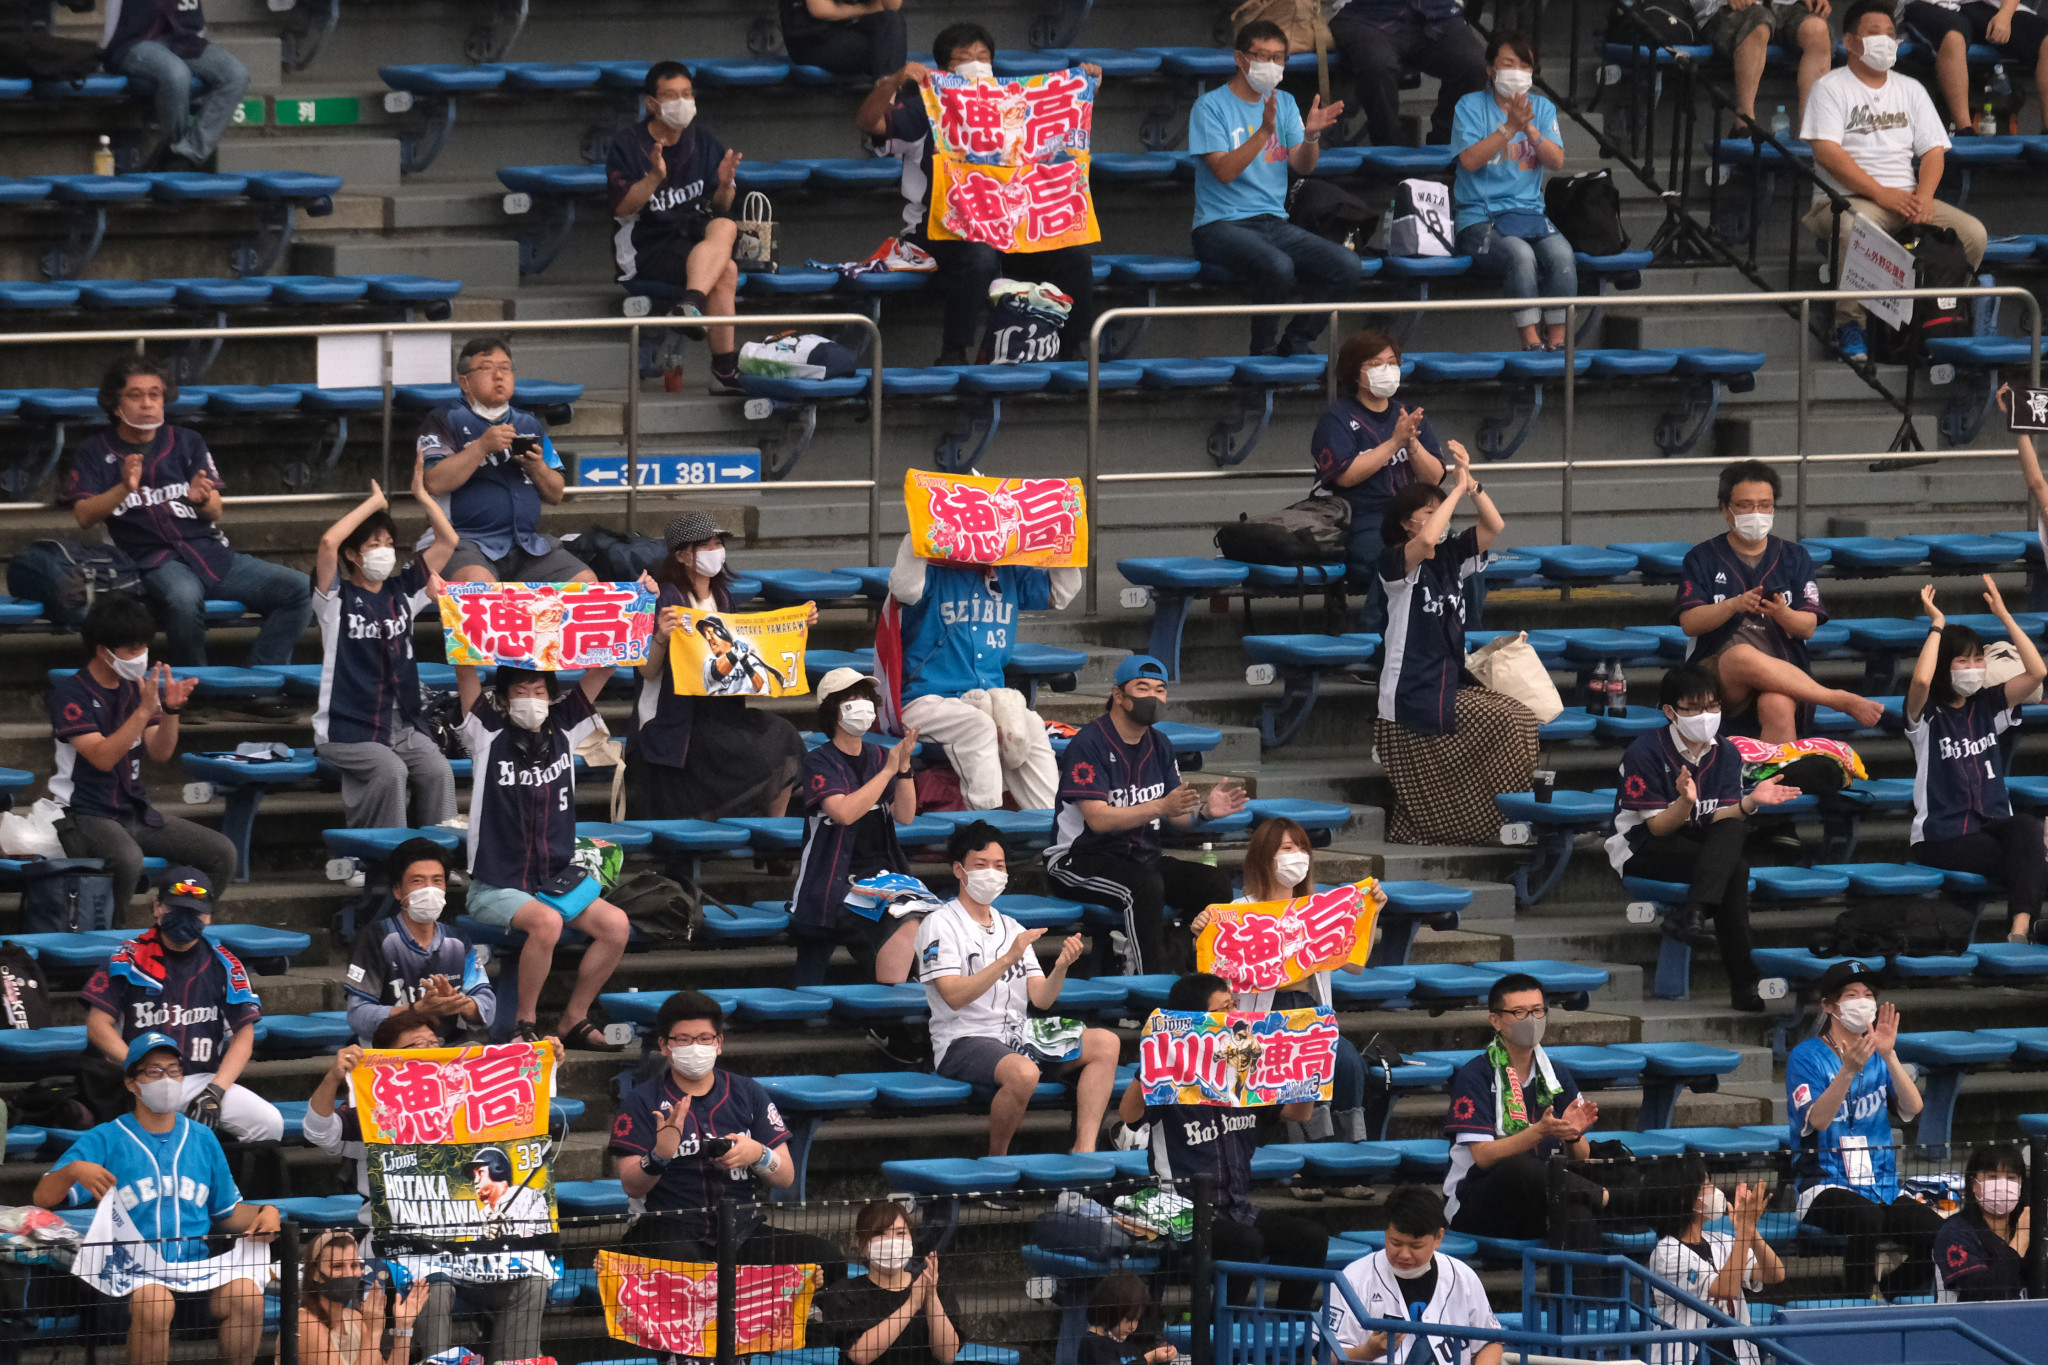 Over 10,000 spectators attend sporting events as Japan eases restrictions